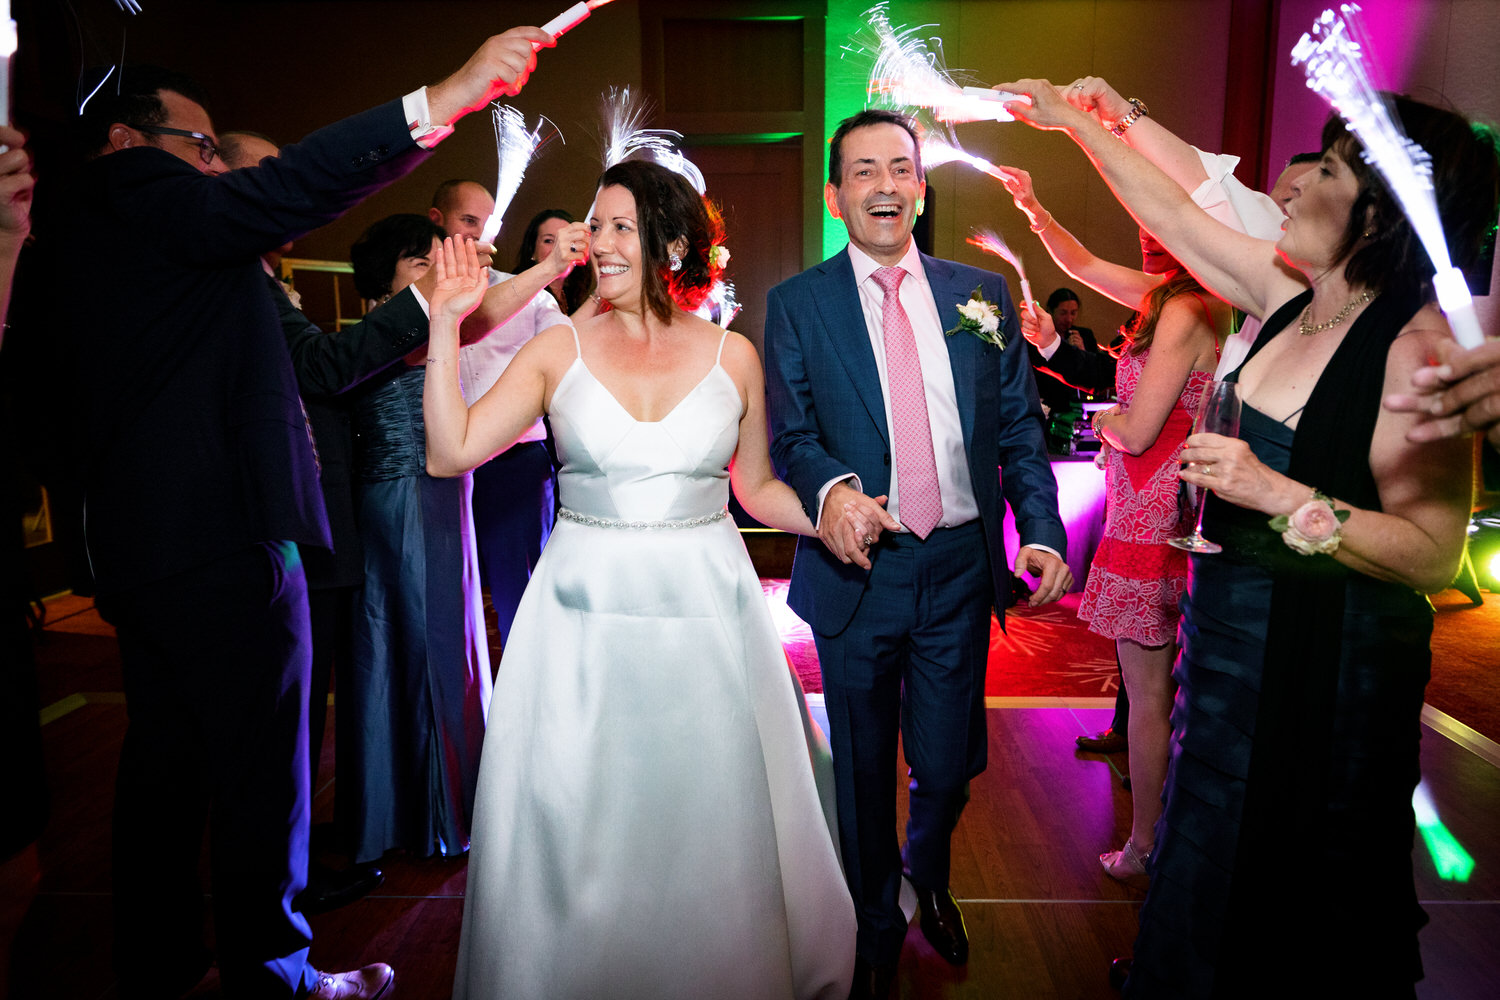 A joyous exit for a bride and groom as wedding guests wave colorful LED fiber wands.